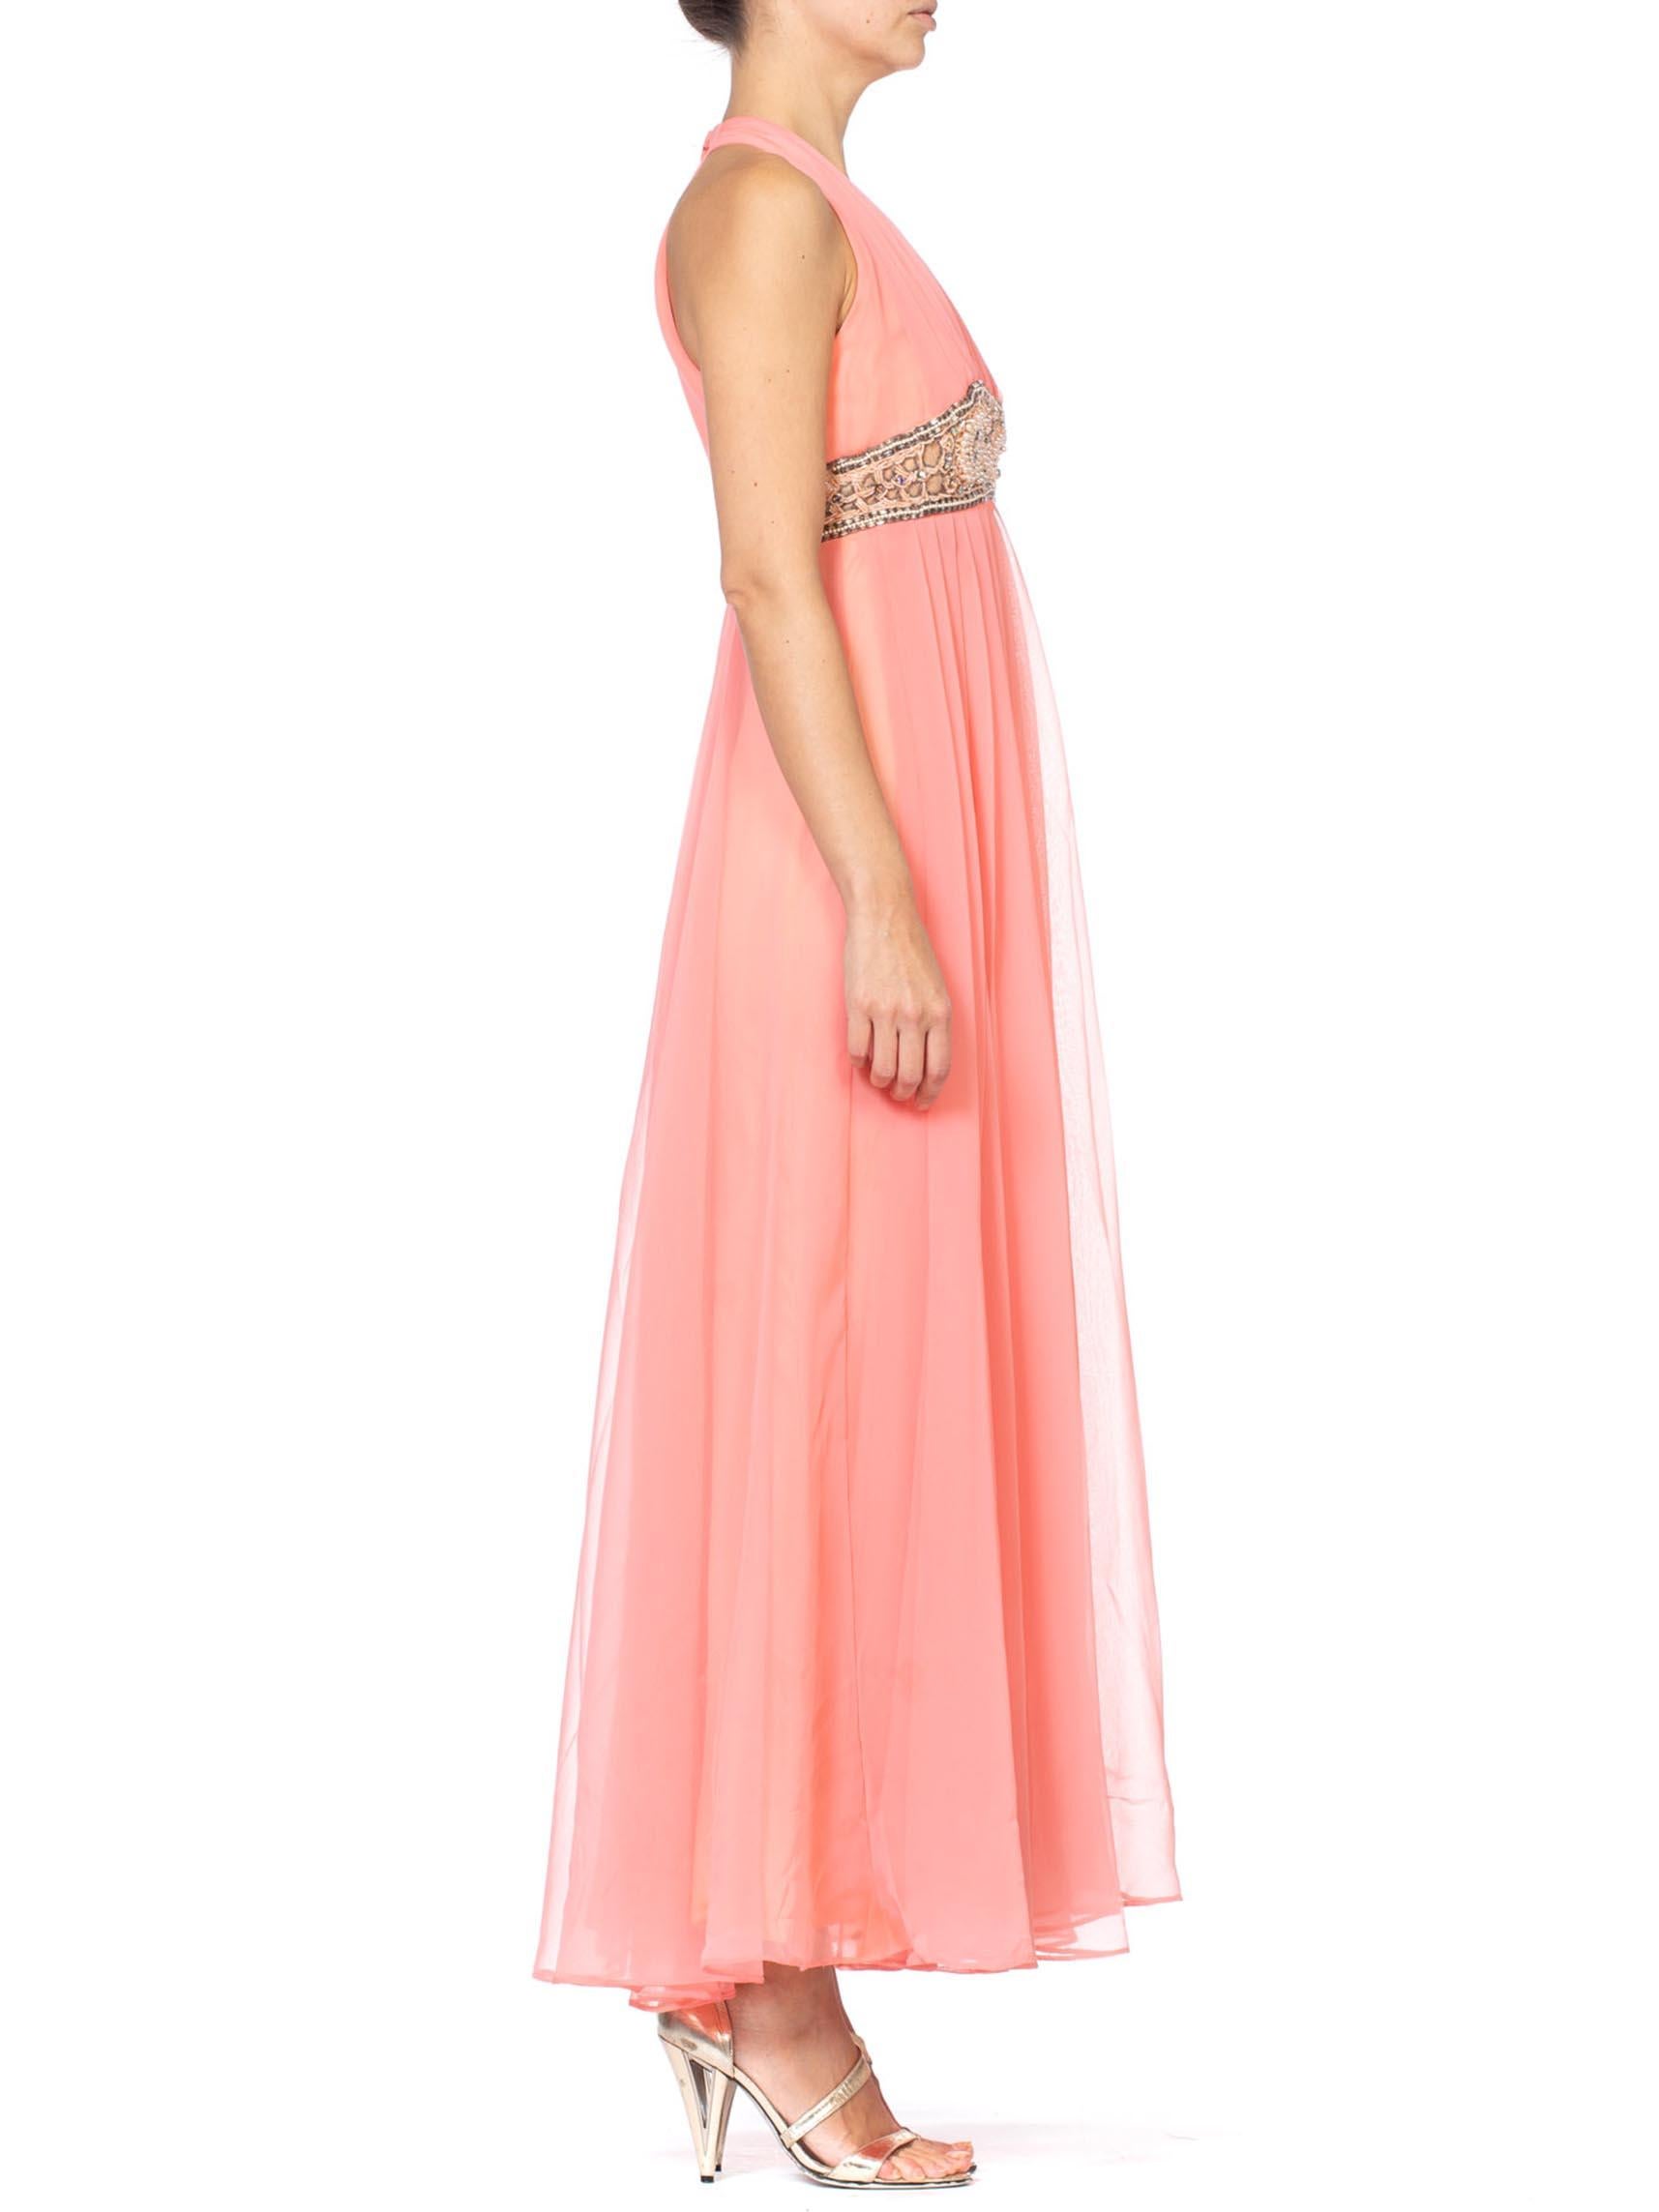 Women's 1970S Salmon Pink Polyester Chiffon Empire Waist Godess Gown With Crystal Beadi For Sale